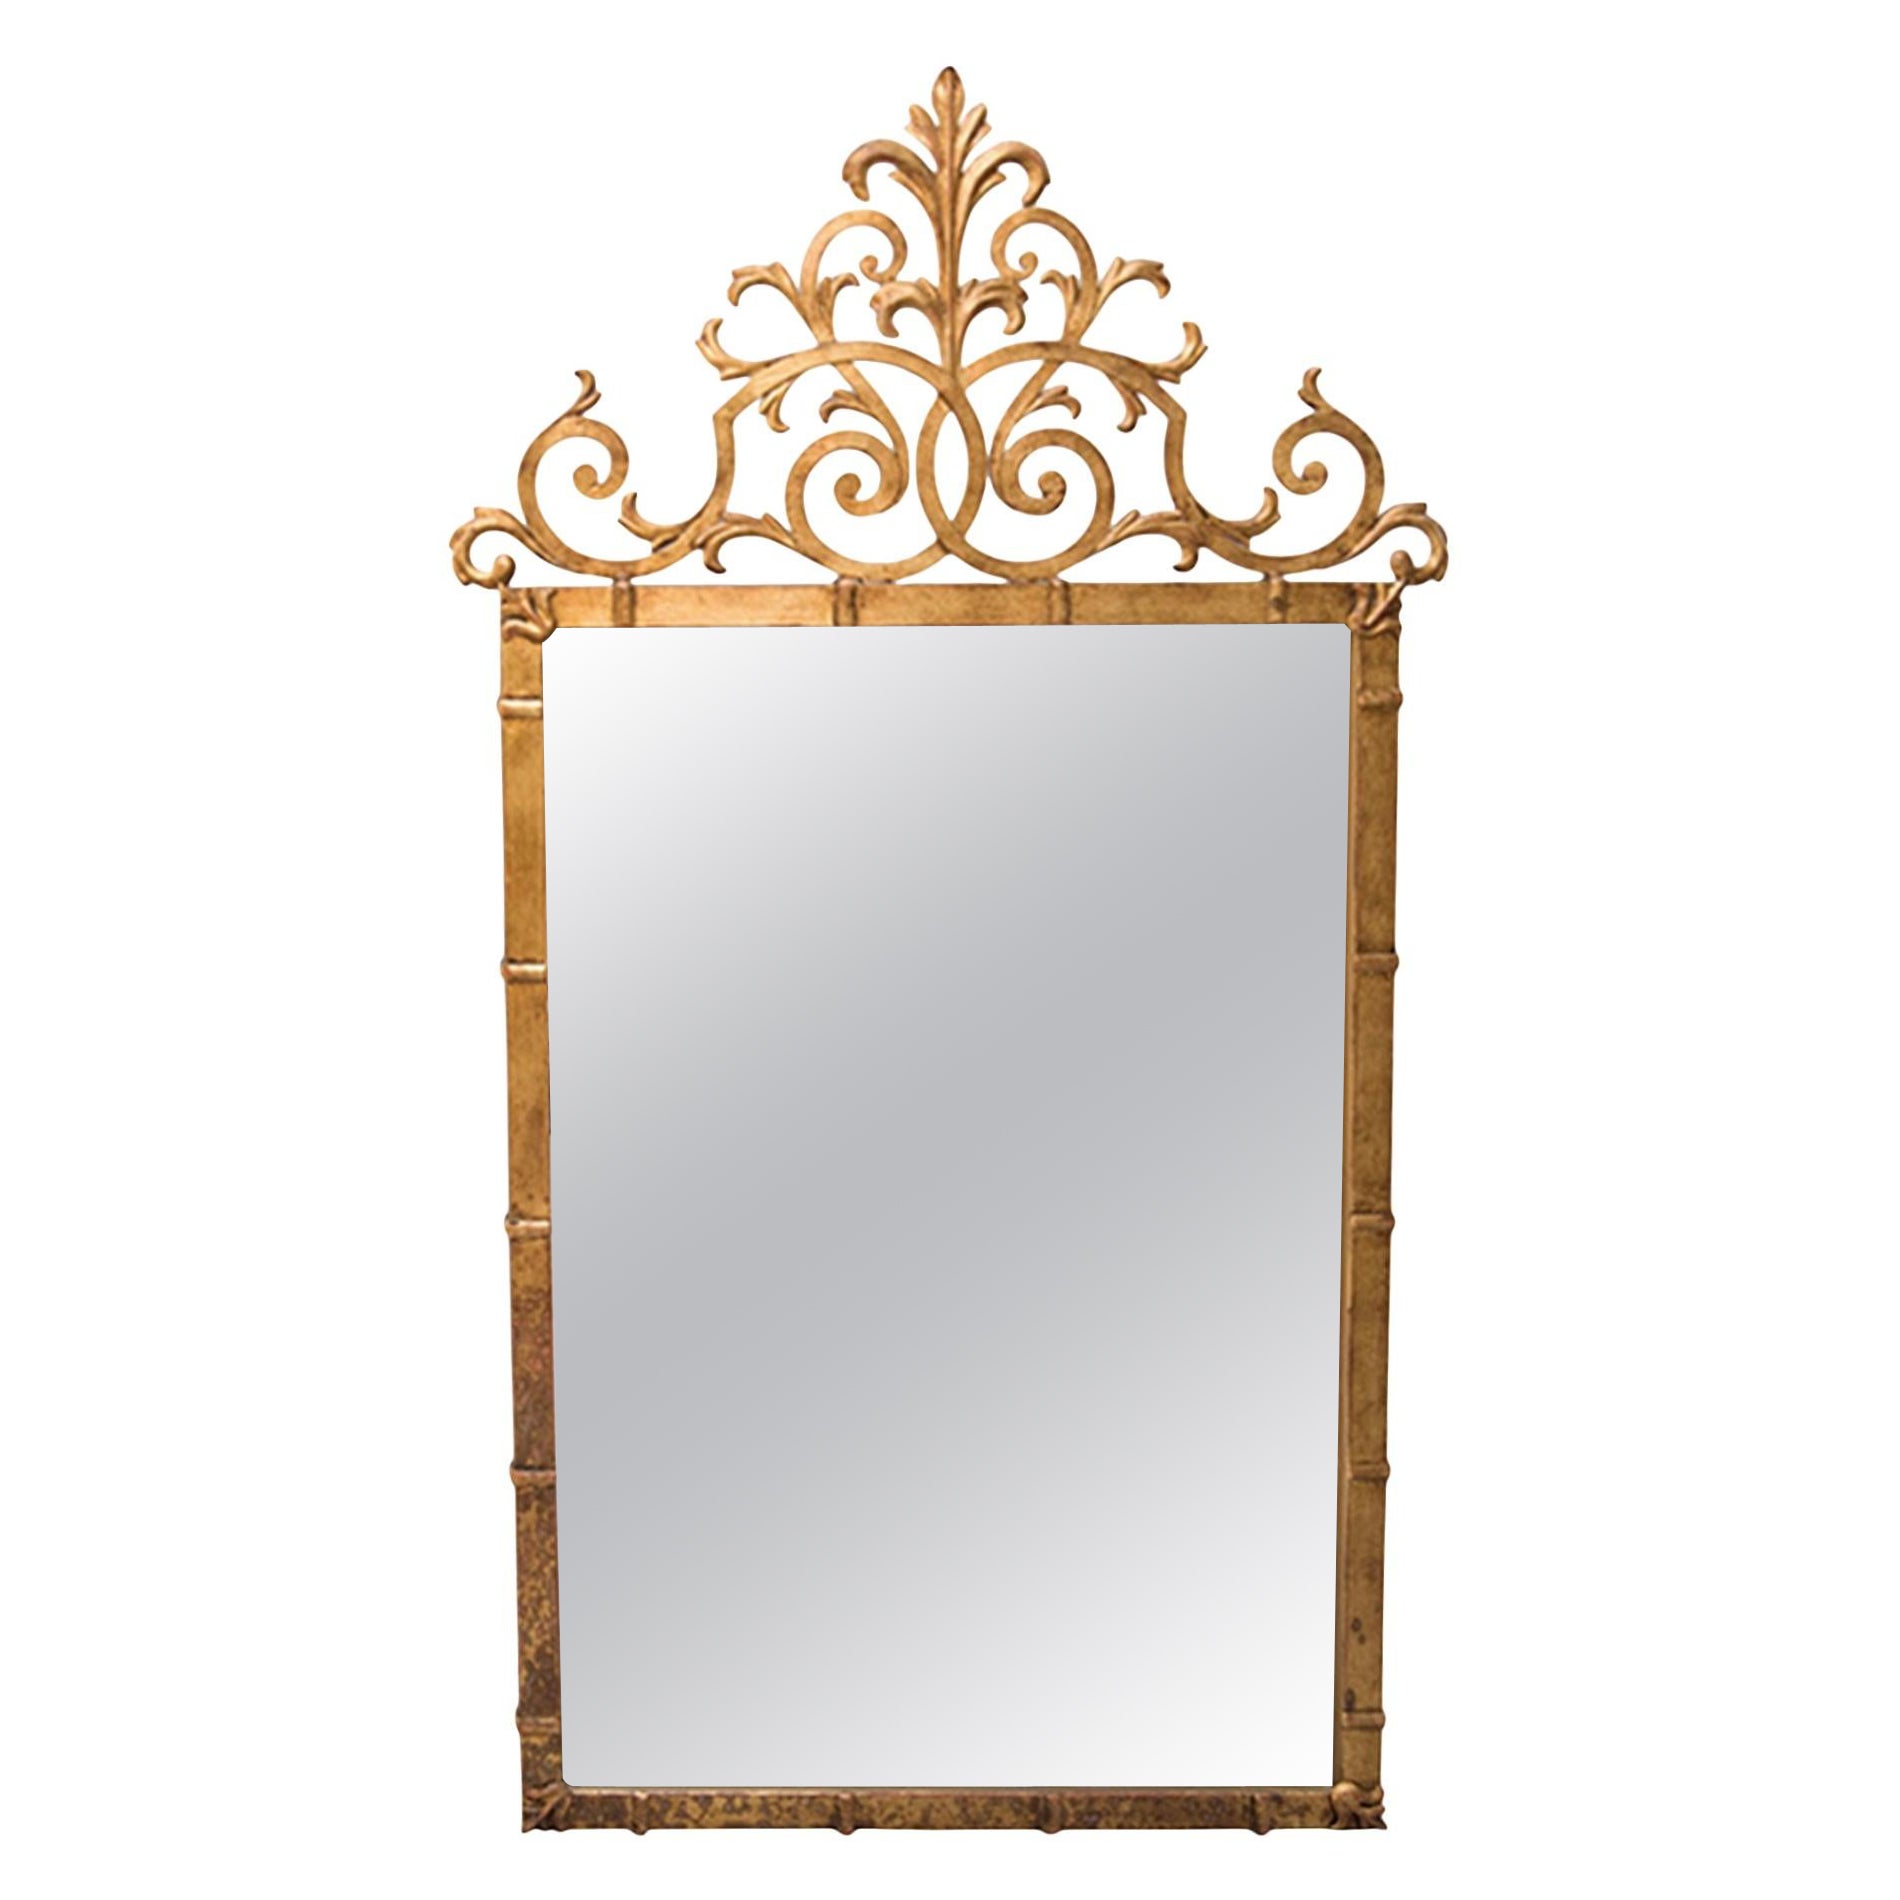 Palladio Gilt Metal Rococo Style Mirror Made in Italy